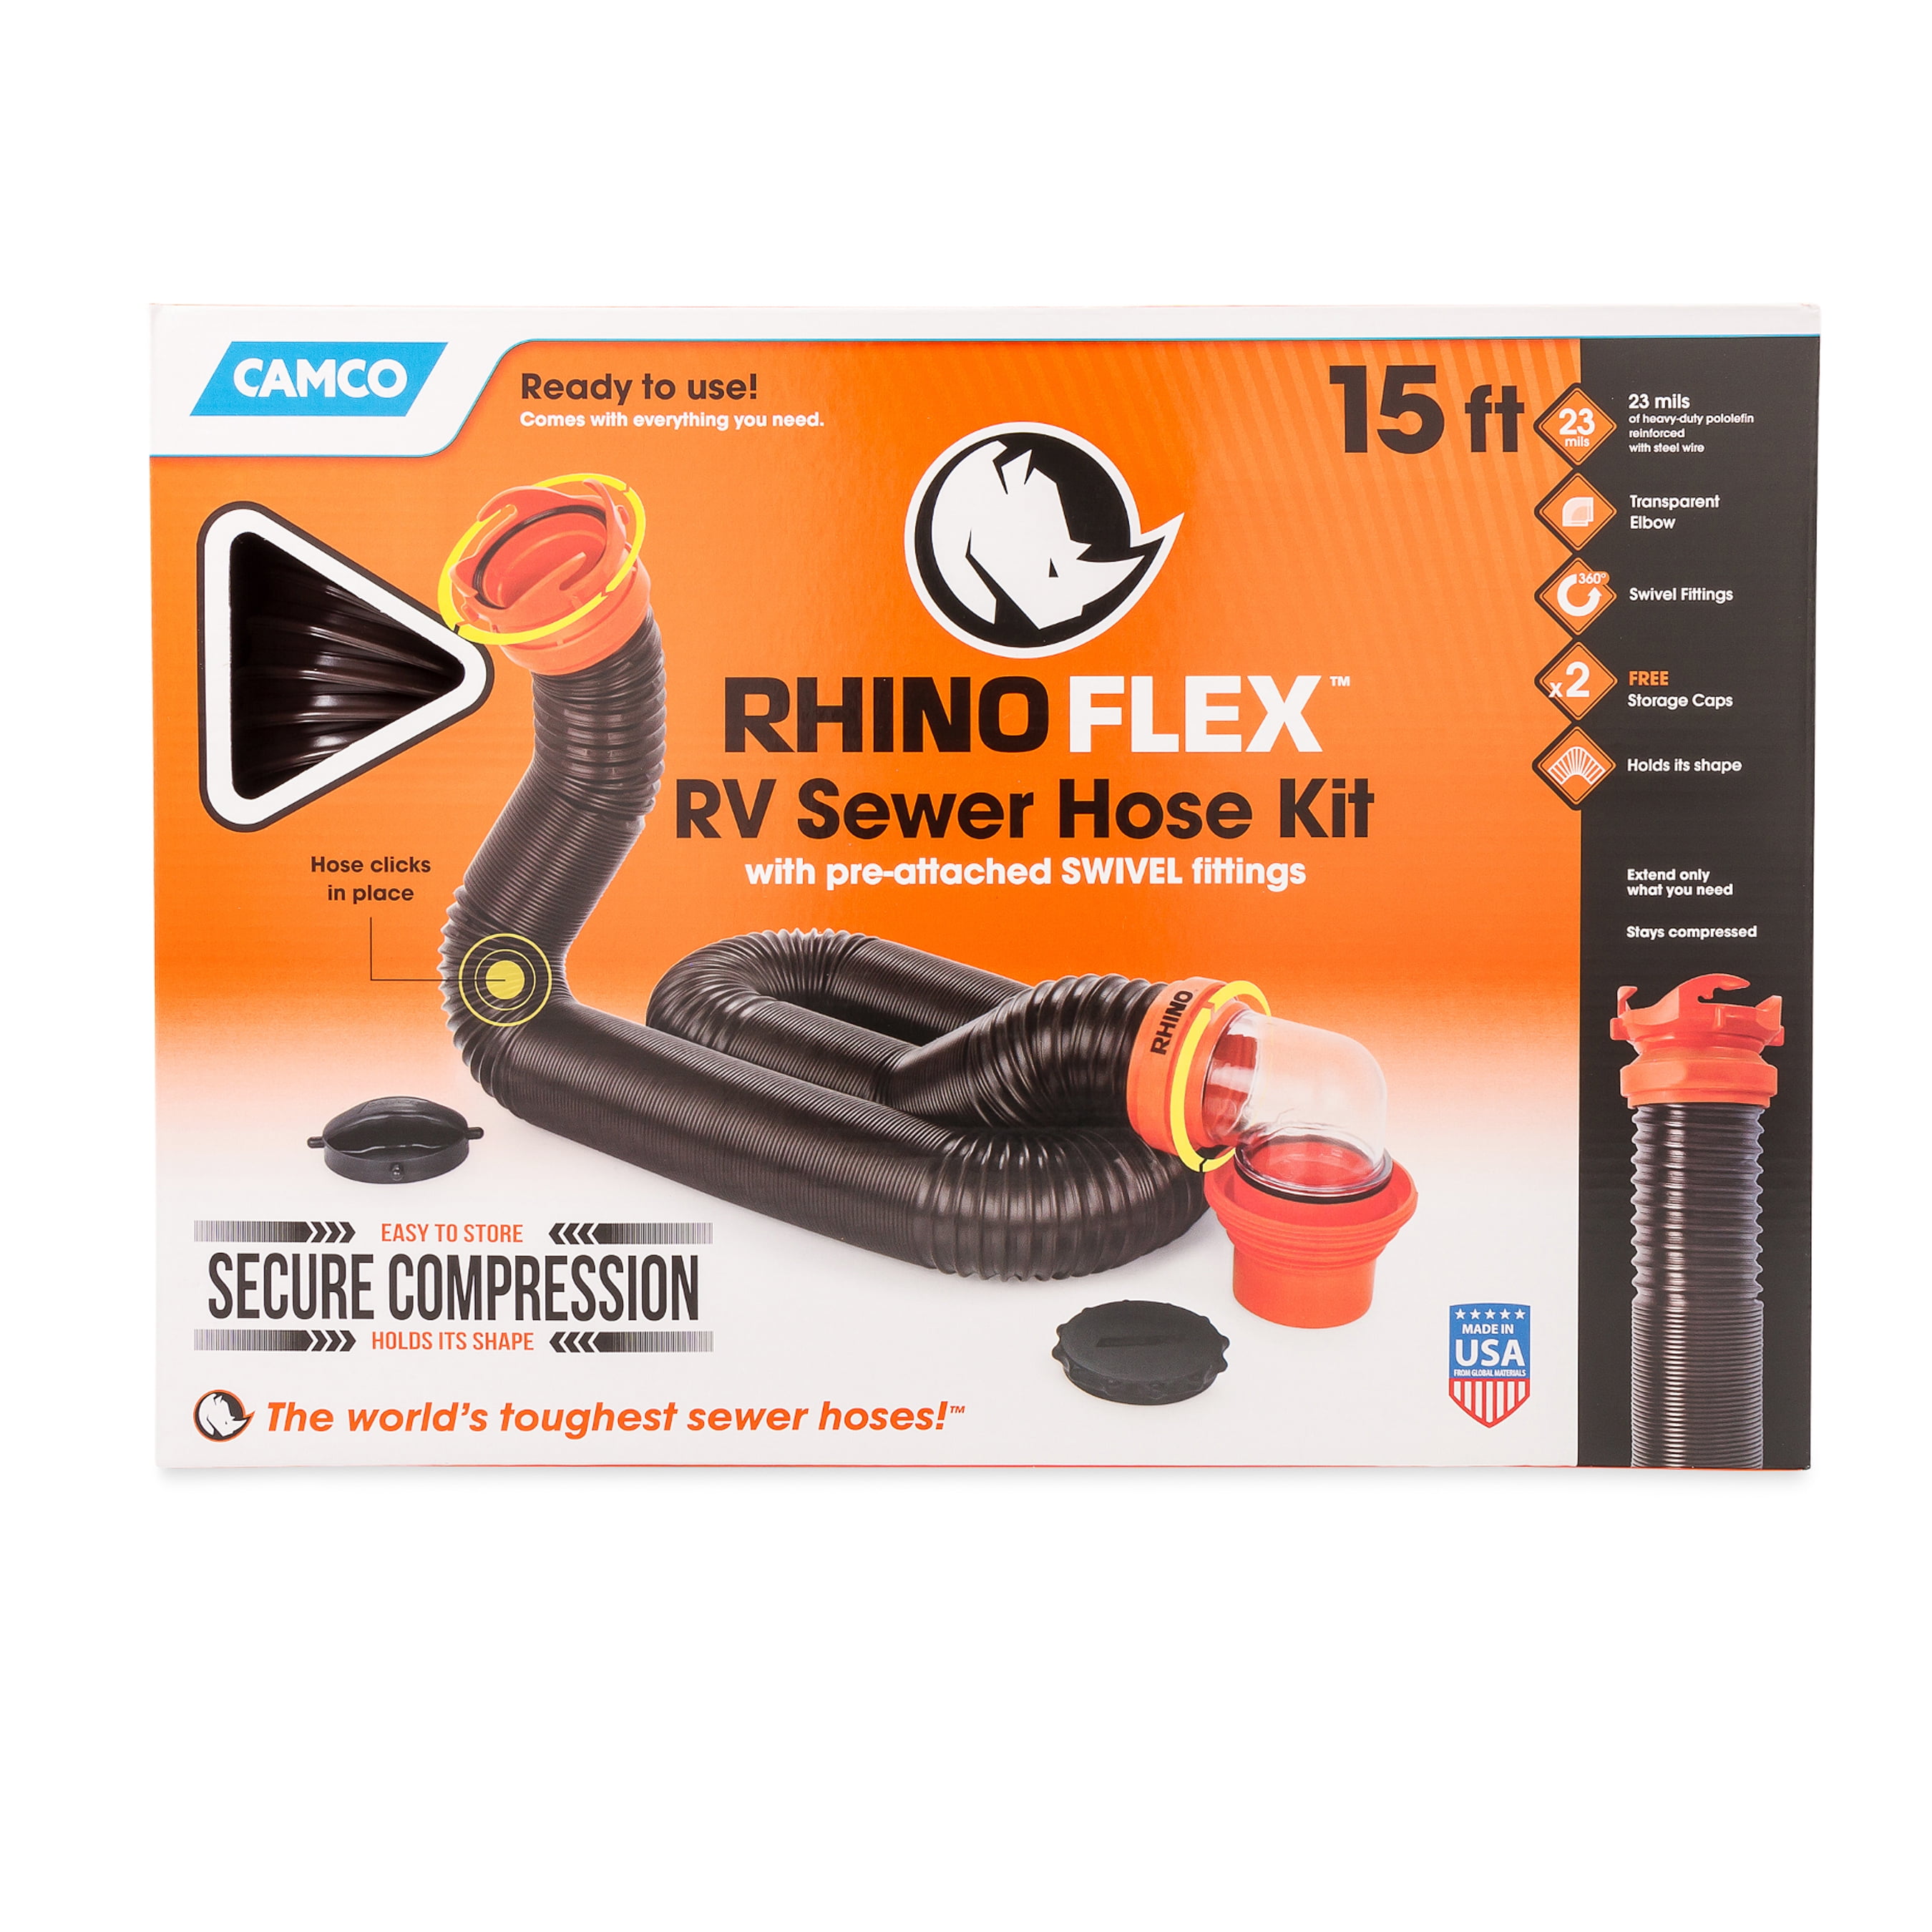 Camco Camper/RV RhinoFLEX Sewer Hose Kit with 15' Hose and Swivel